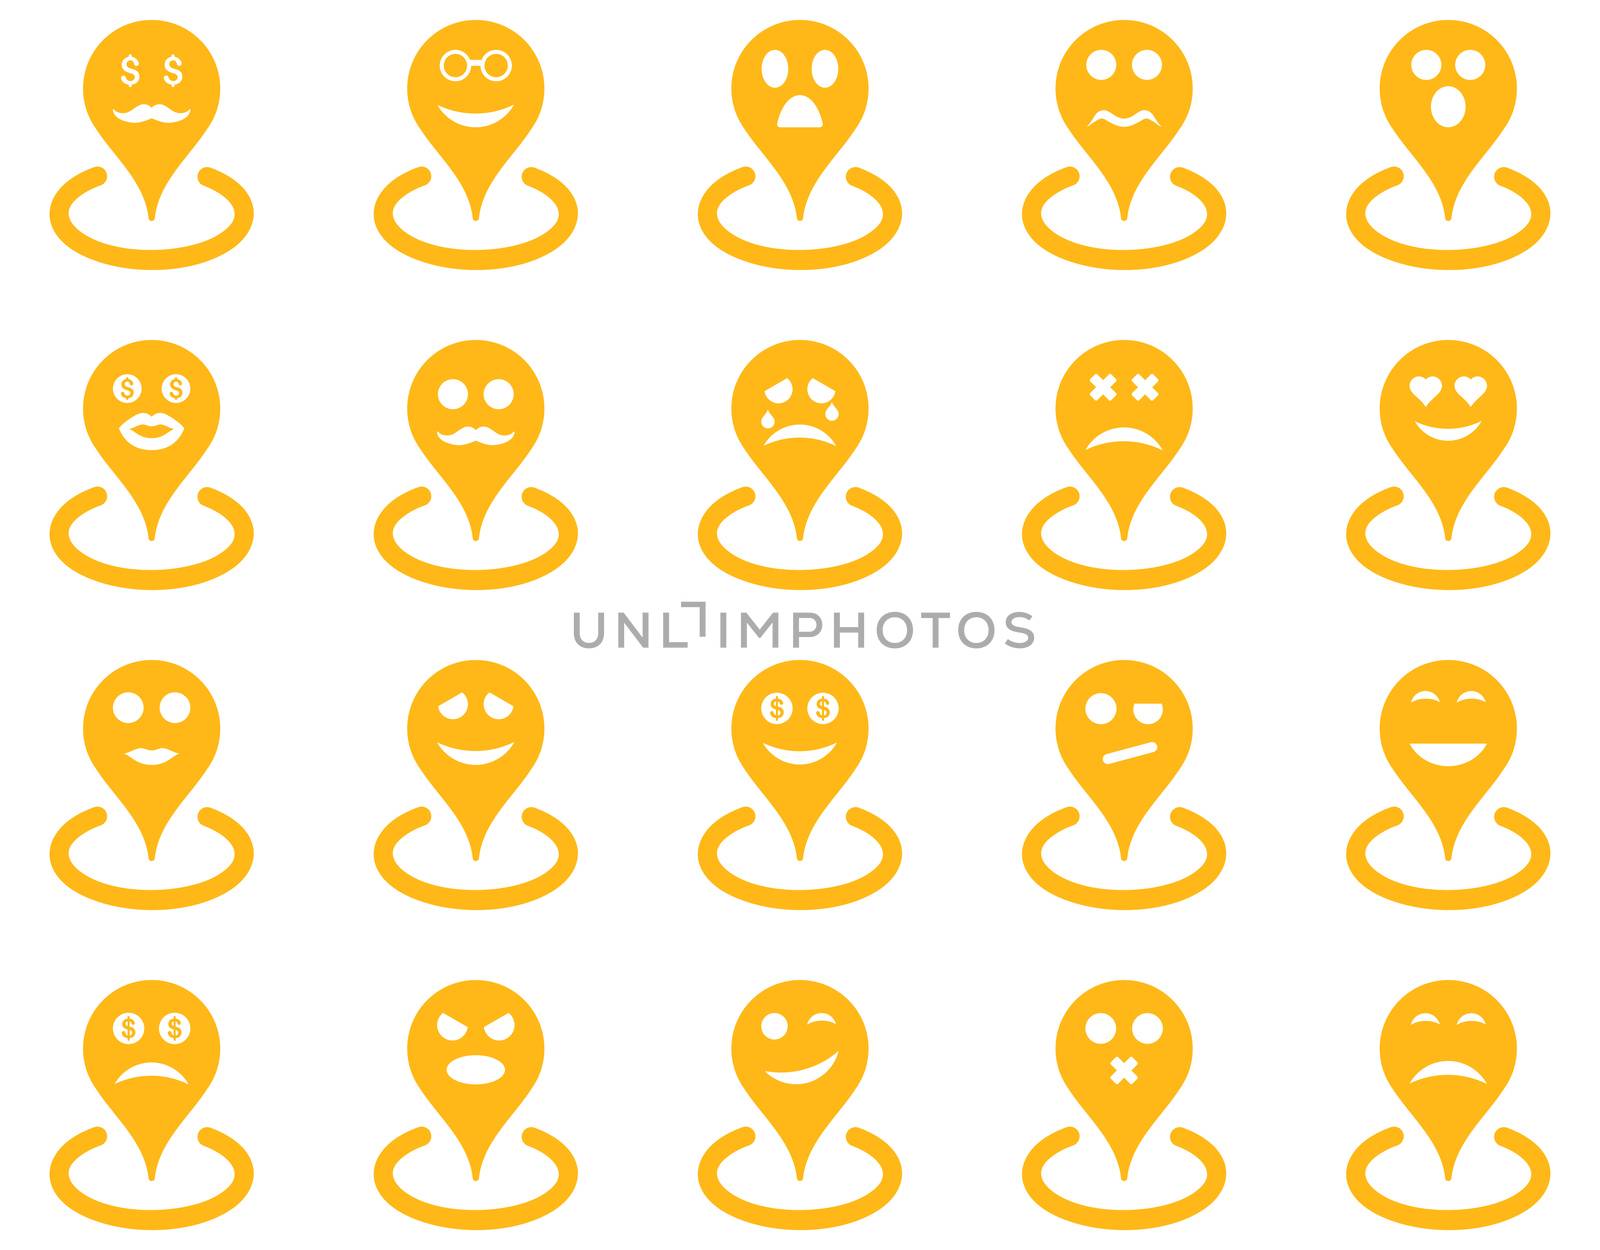 Smiled location icons. Glyph set style is flat images, yellow symbols, isolated on a white background.